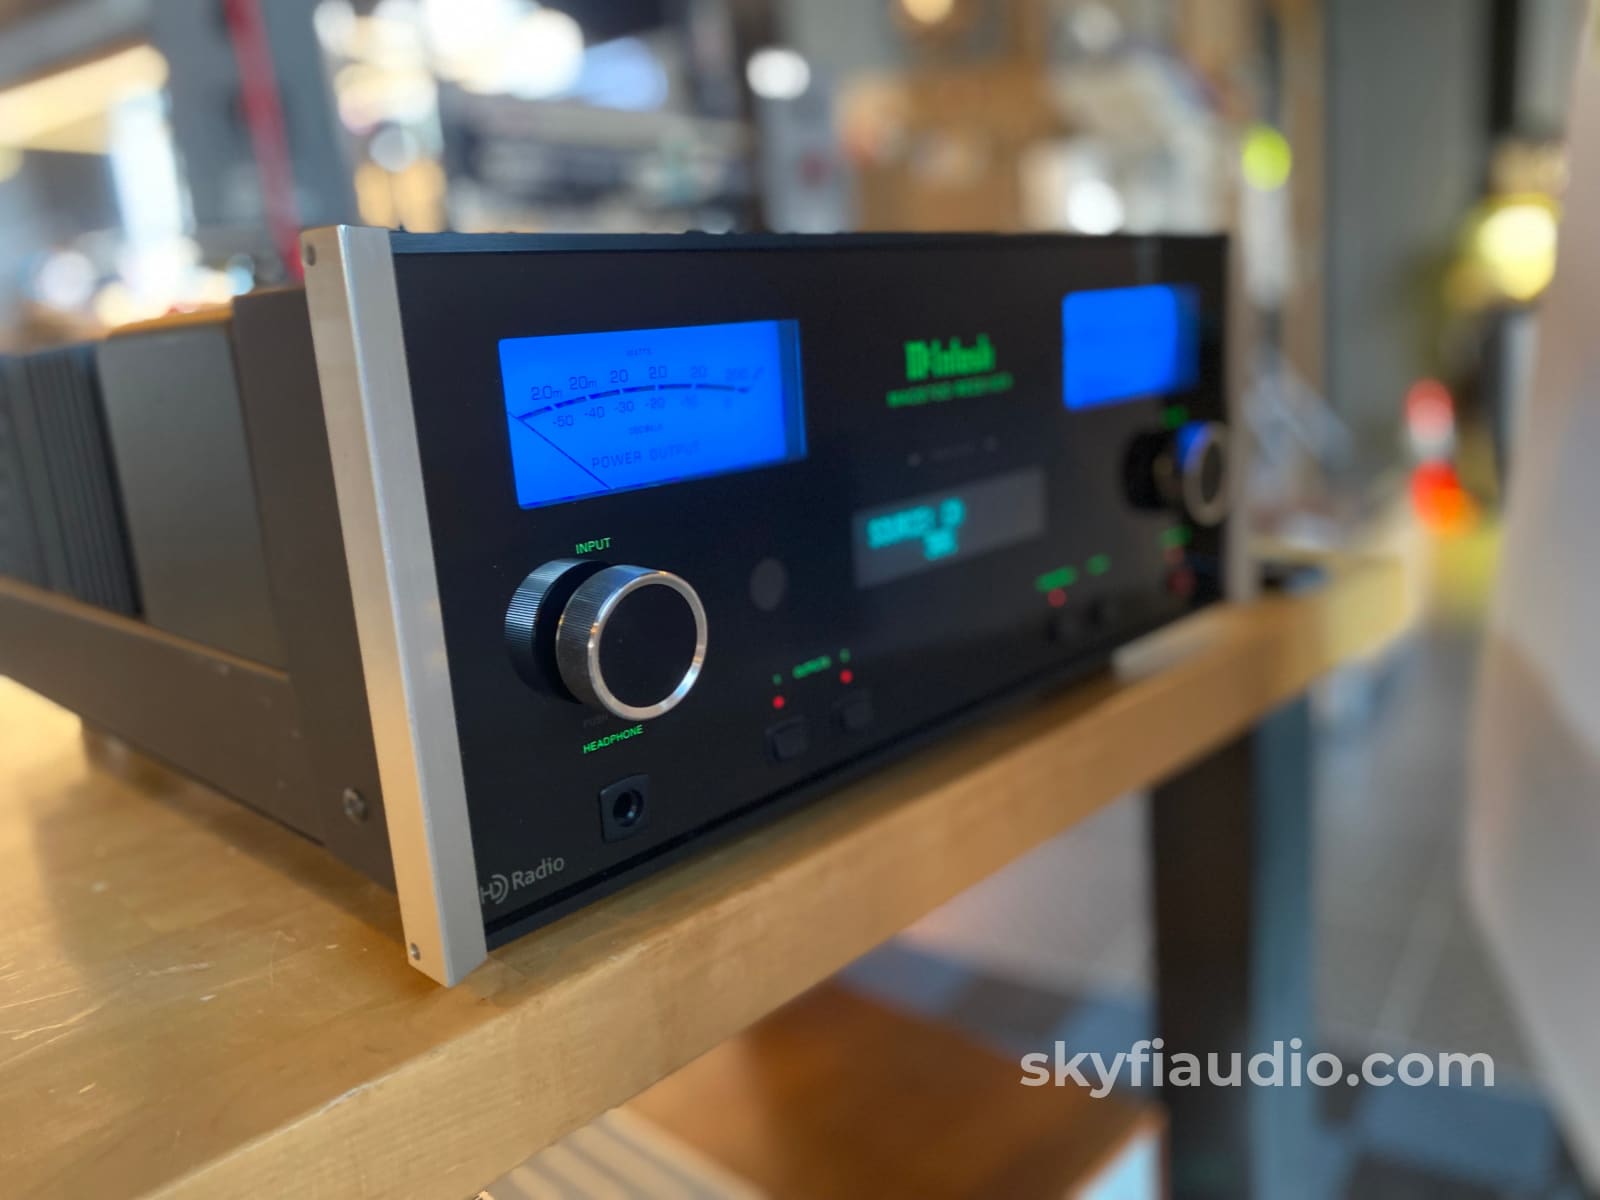 Mcintosh Ma6700 Solid State Receiver With Hd Fm/Am Radio Dac Mm/Mm Phono Integrated Amplifier